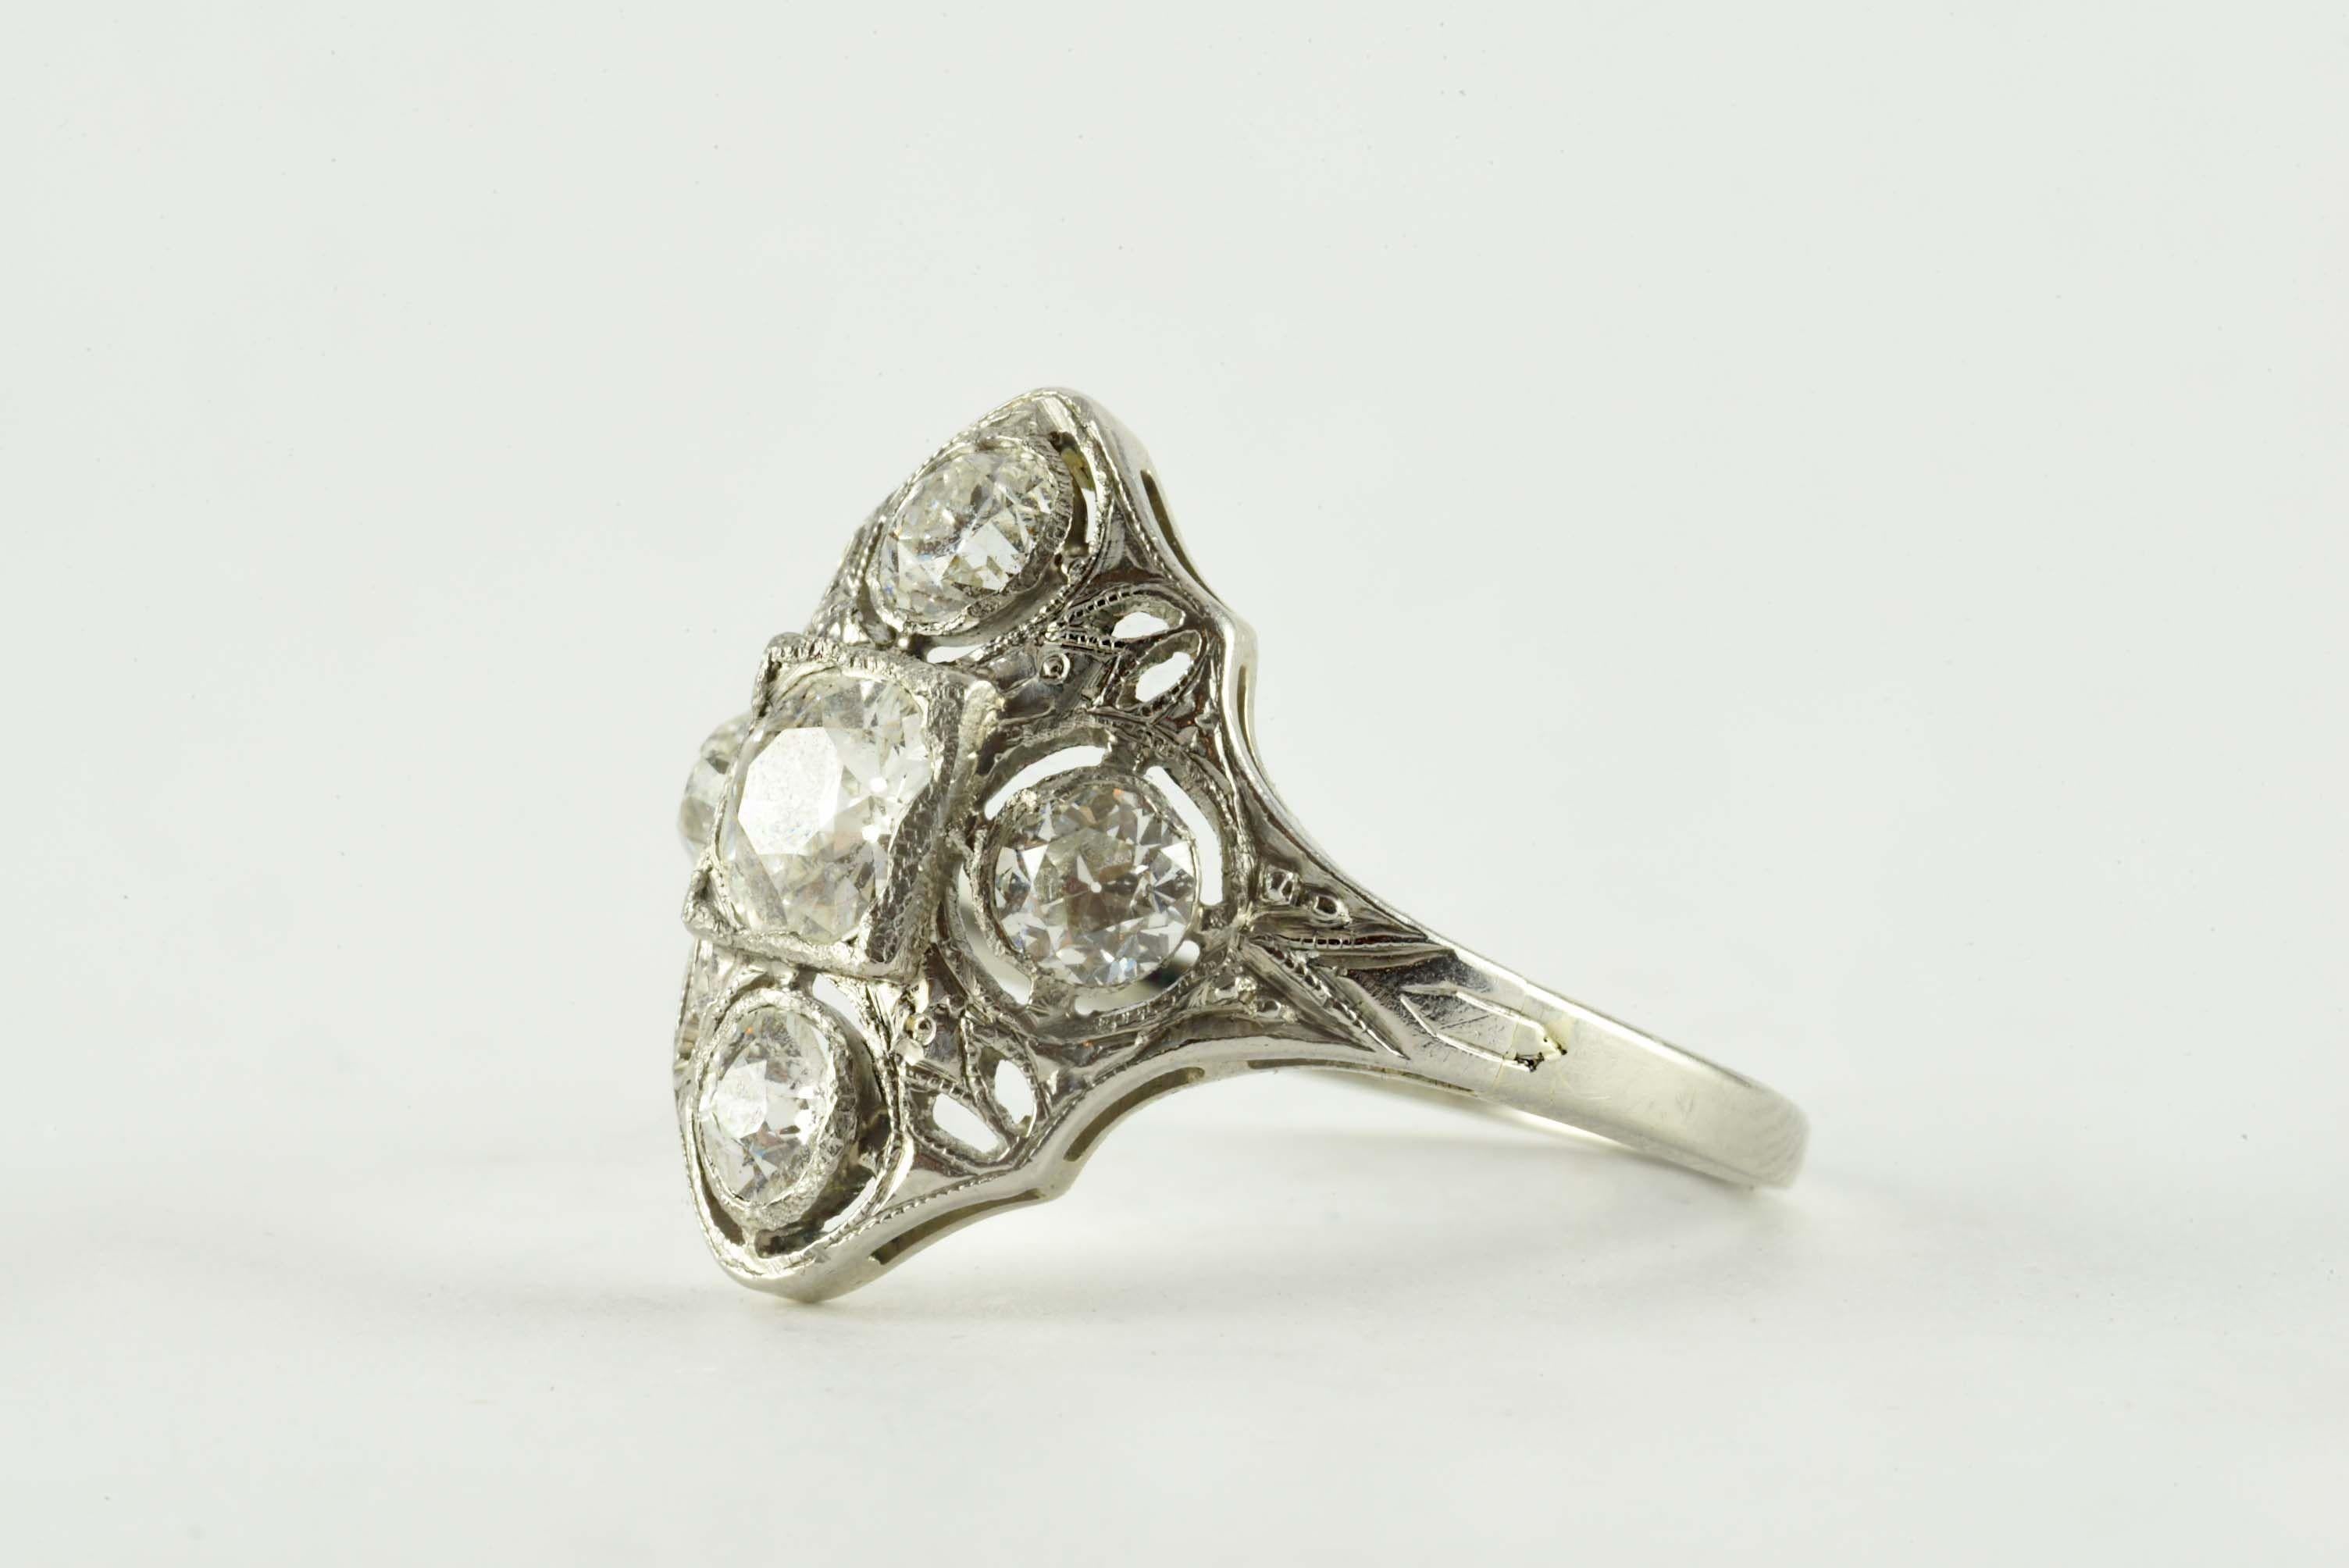 Crafted in the 1920s from platinum, this stunning Navette band is set with an Old European cut diamond center stone measuring 0.47 carats, F-G color, VS clarity and accented on all sides with four Old European cut diamonds totaling approximately